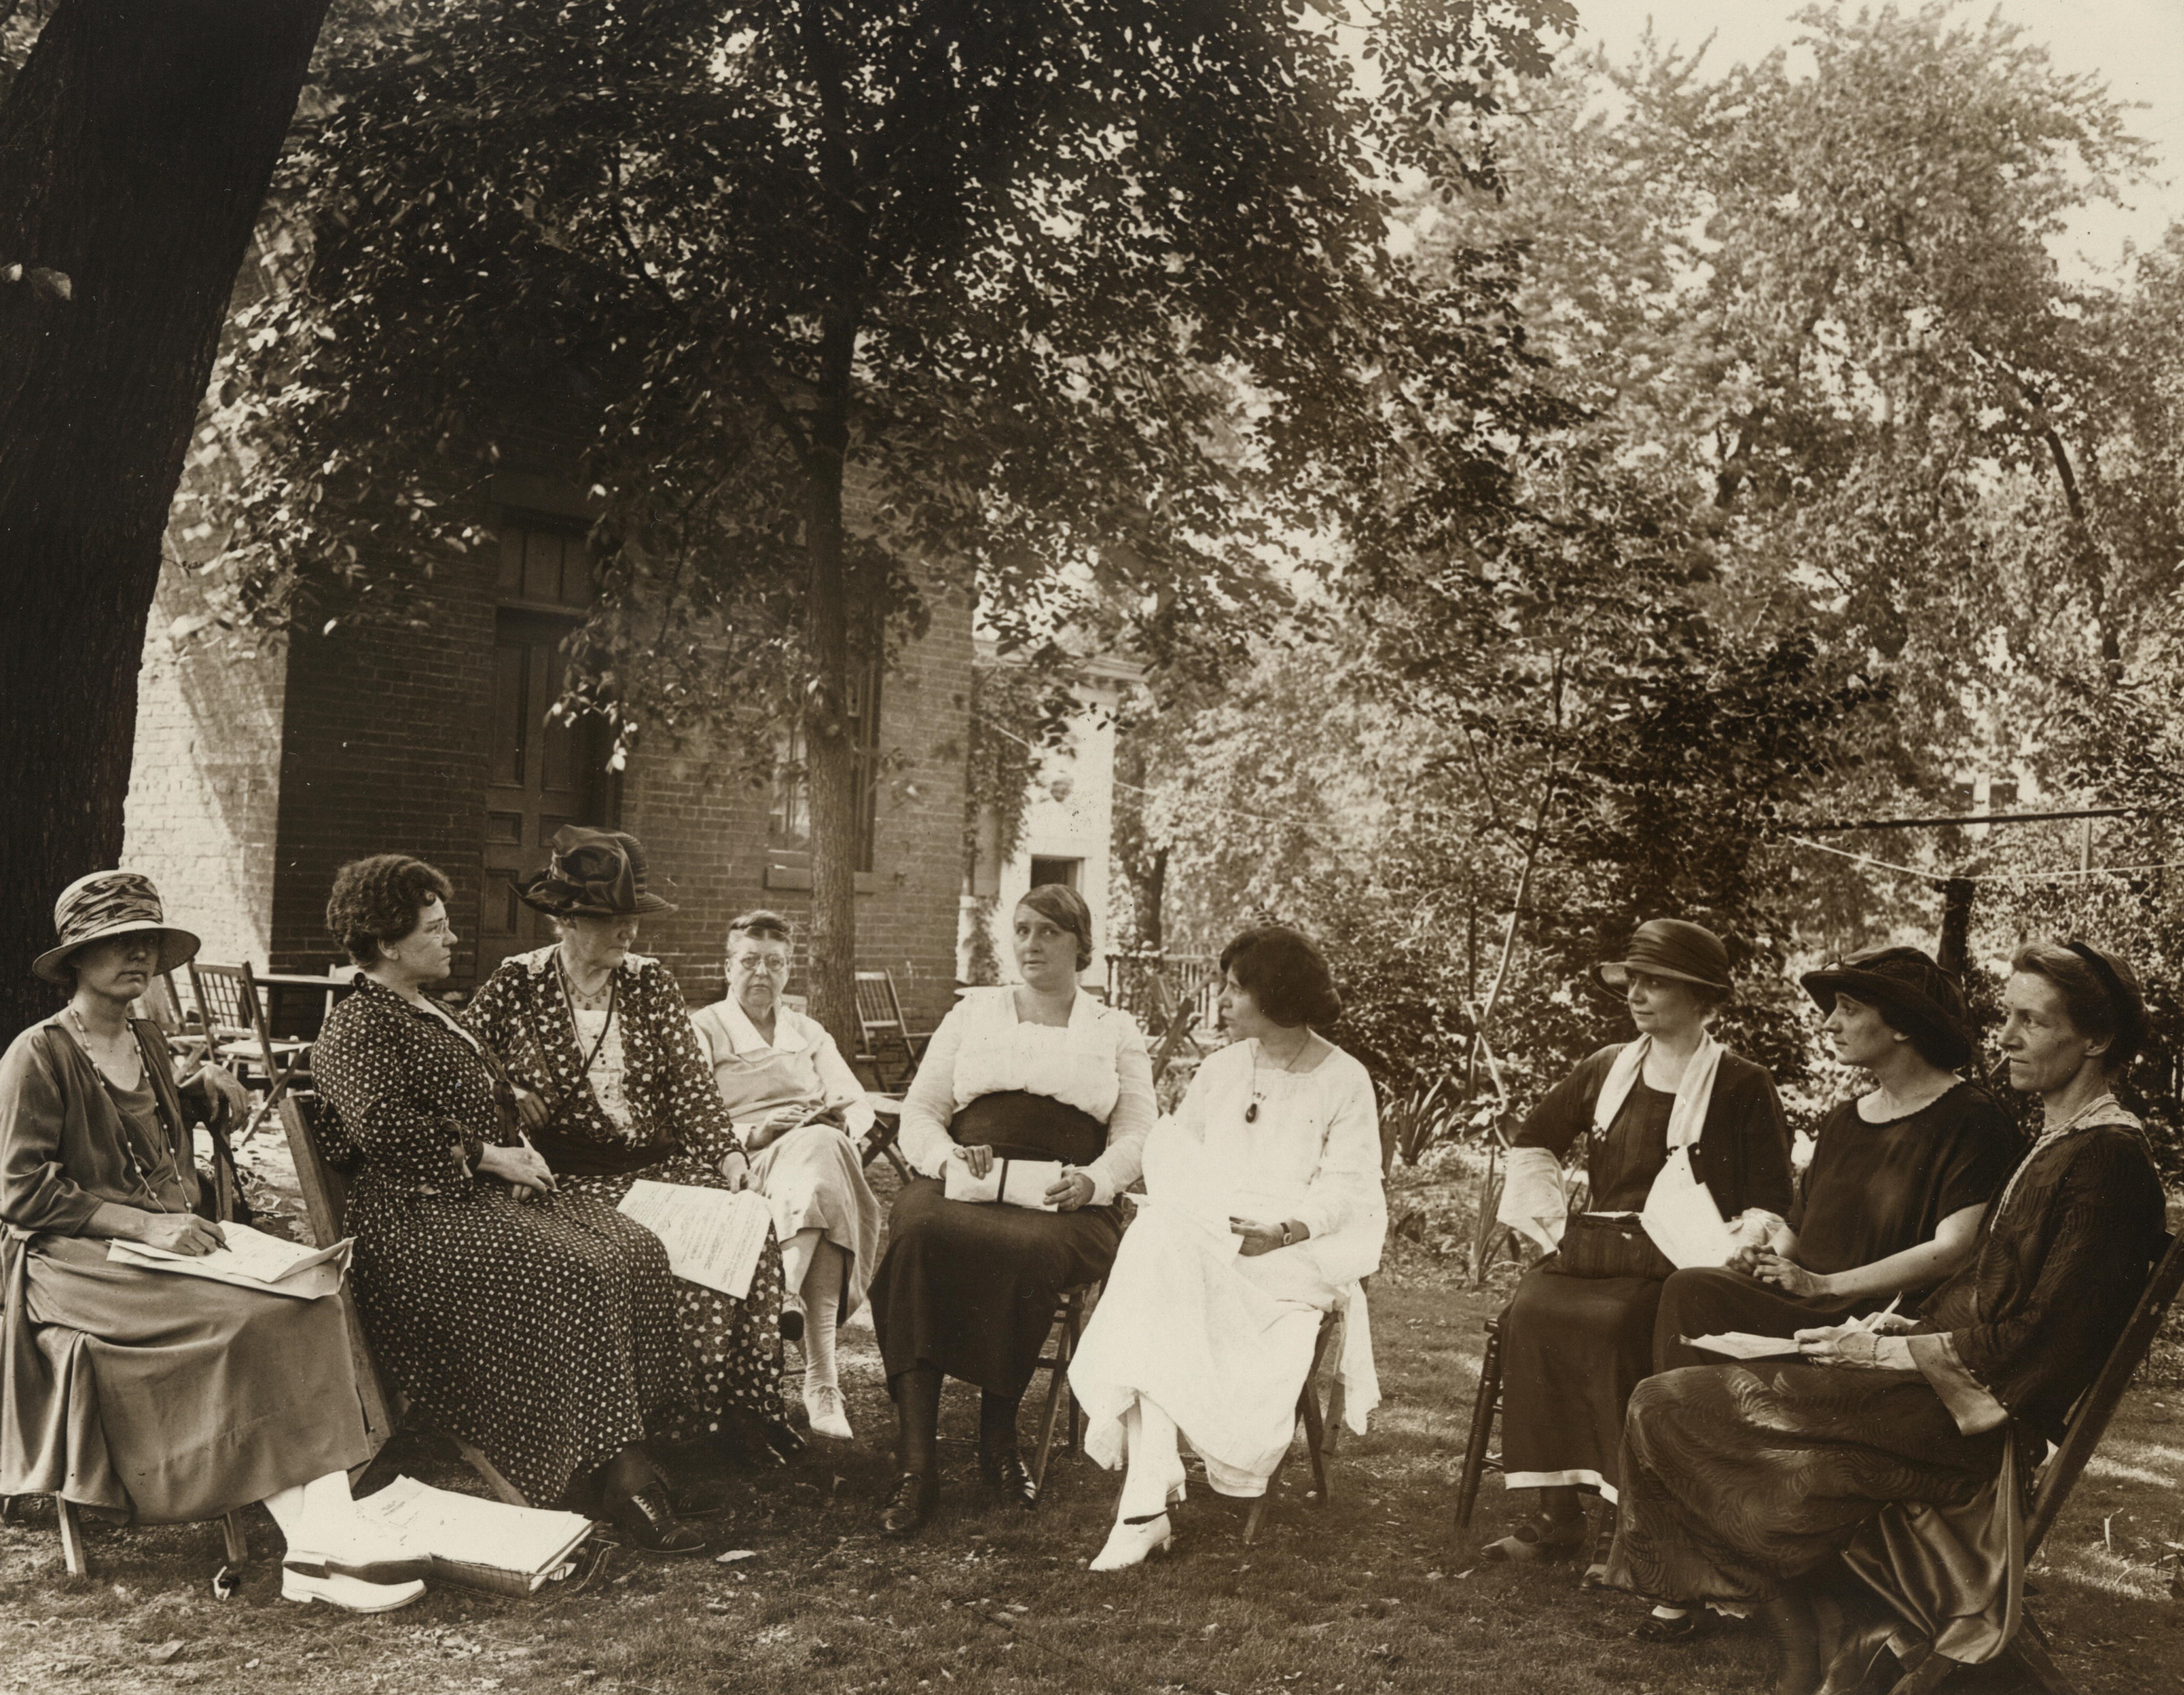 Edith Ainge can be seen in the center of this 1924 meeting of the NWP National Council. She is seated to the left of Alice Paul, who is wearing all white. Retrieved from the collection of the Library of Congress, http://hdl.loc.gov/loc.mss/mnwp.276048.